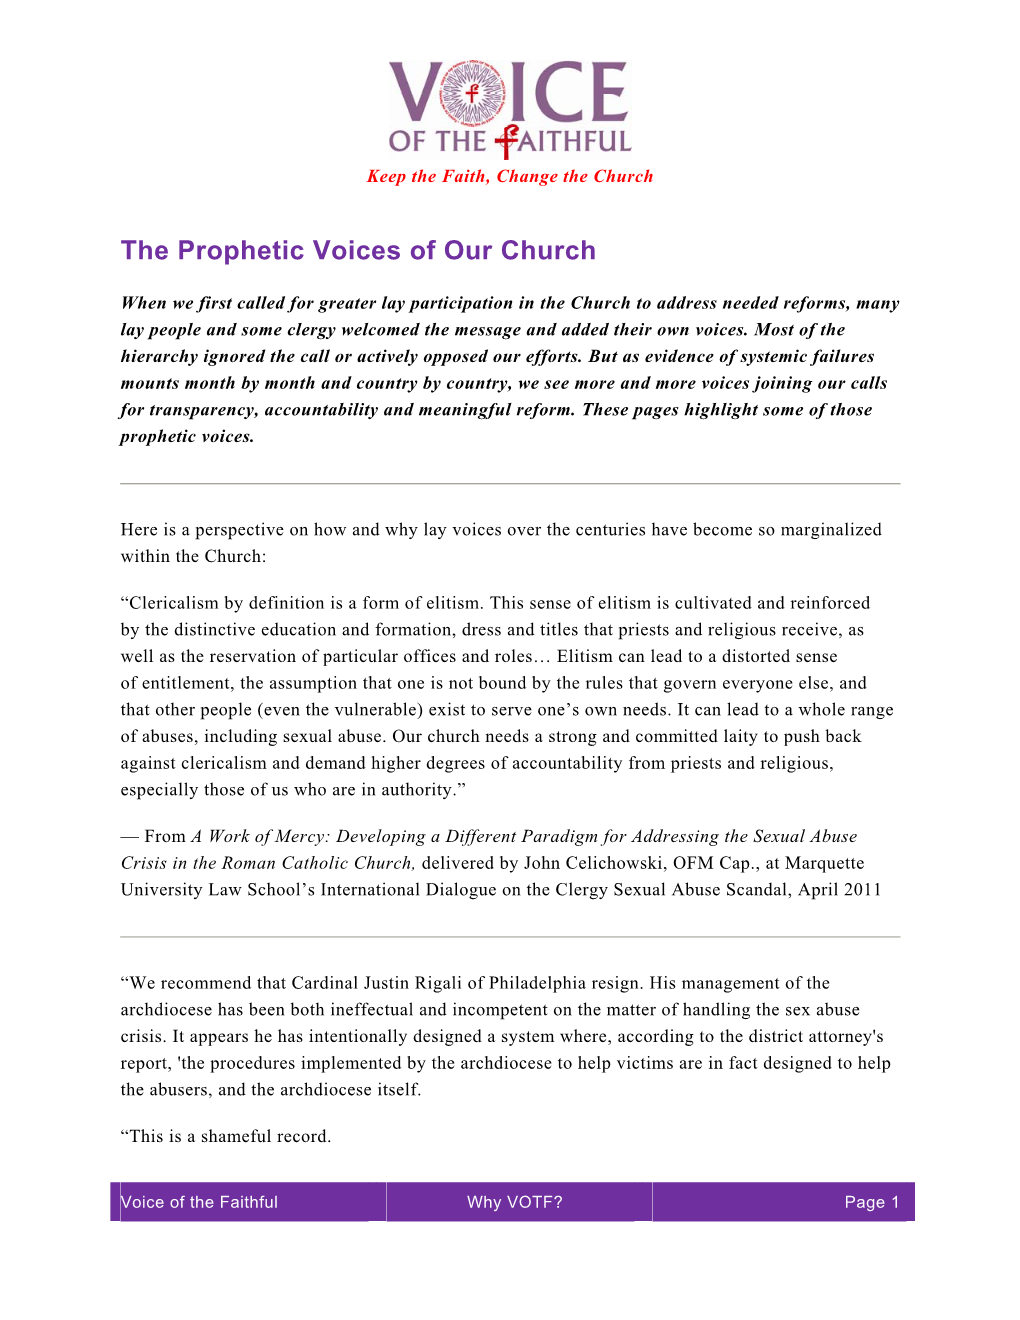 The Prophetic Voices of Our Church